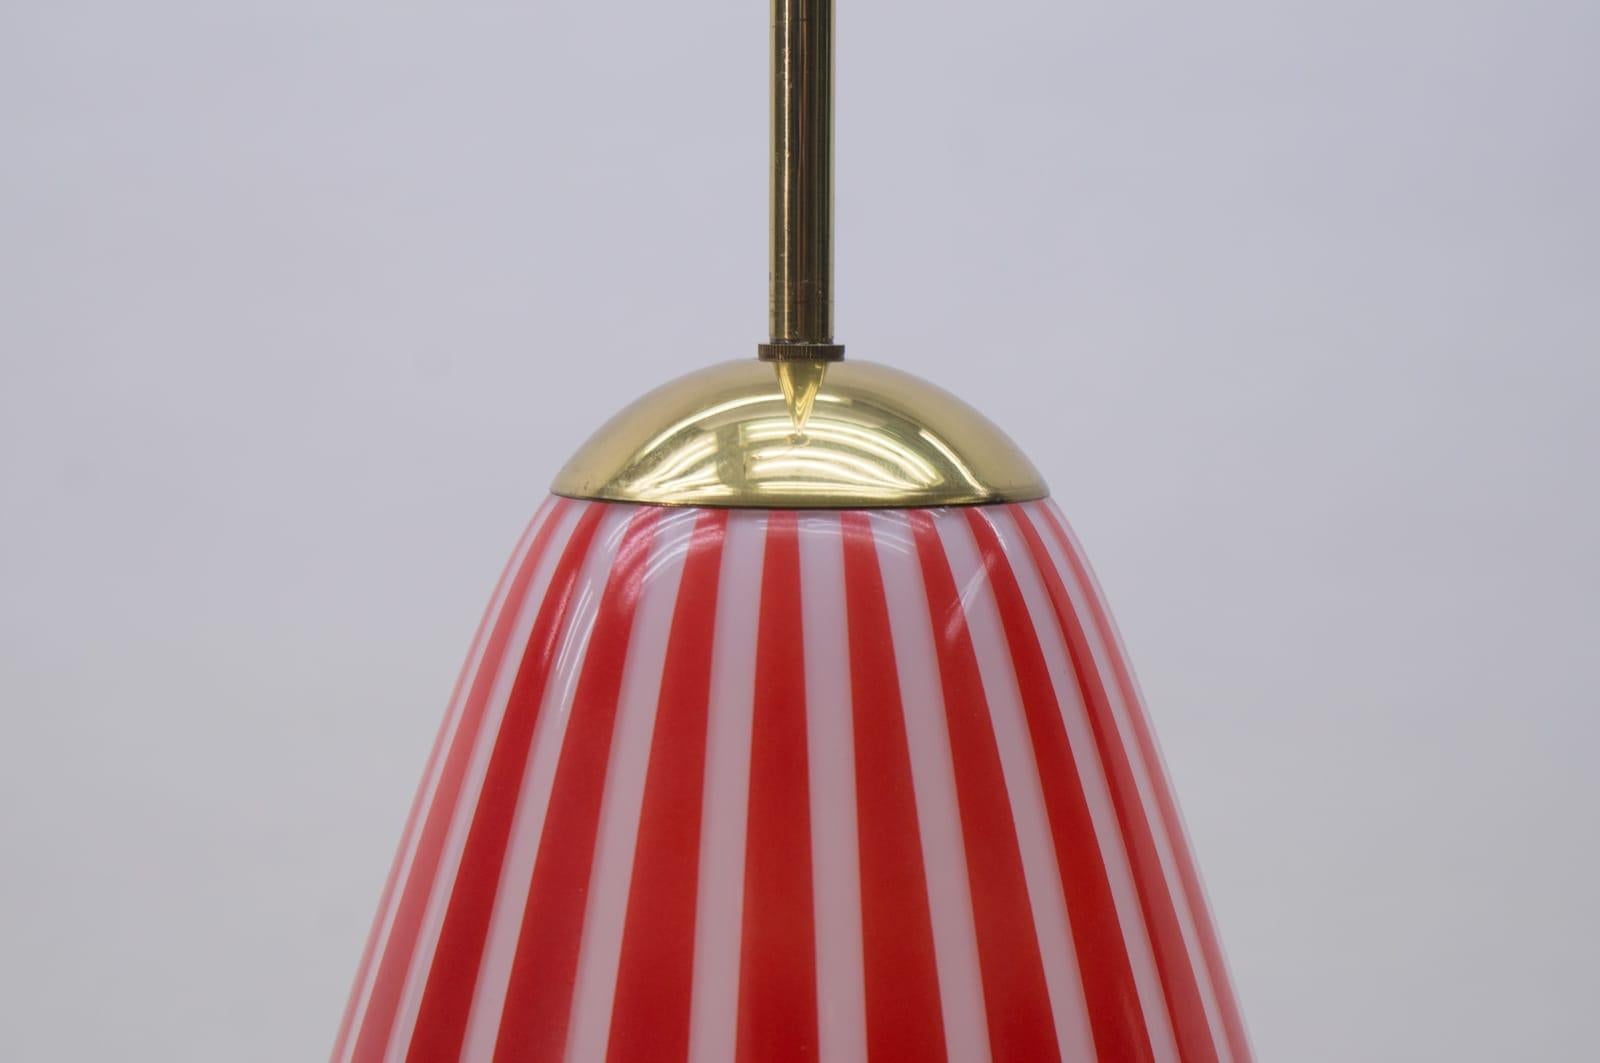 Elegant Mid-Century Modern Pendant Lamp Made of Brass and Glass, 1950s Austria For Sale 3